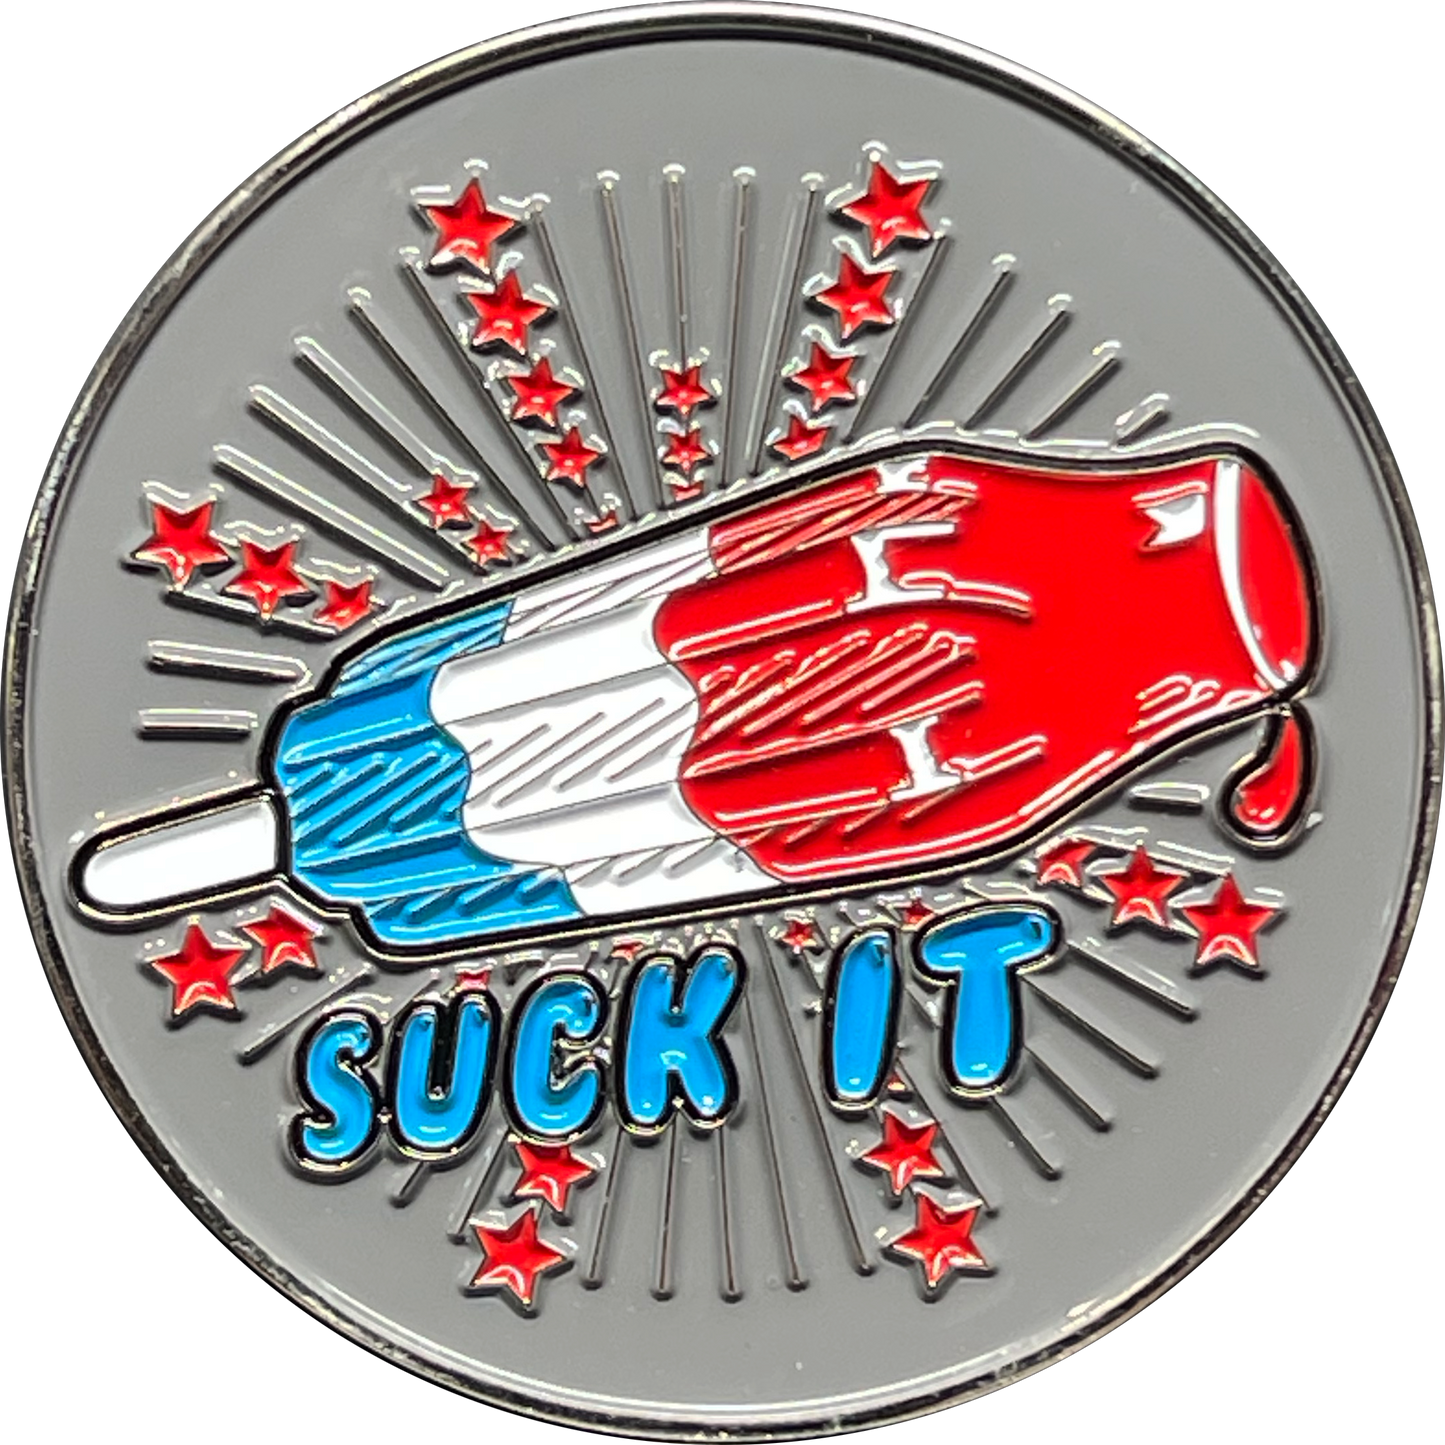 BL14-012 Suck it Rocket Pop Challenge Coin Thin Blue Line Police CBP LAPD Chigaco NYPD Baltimore FBI ATF FAM HSI